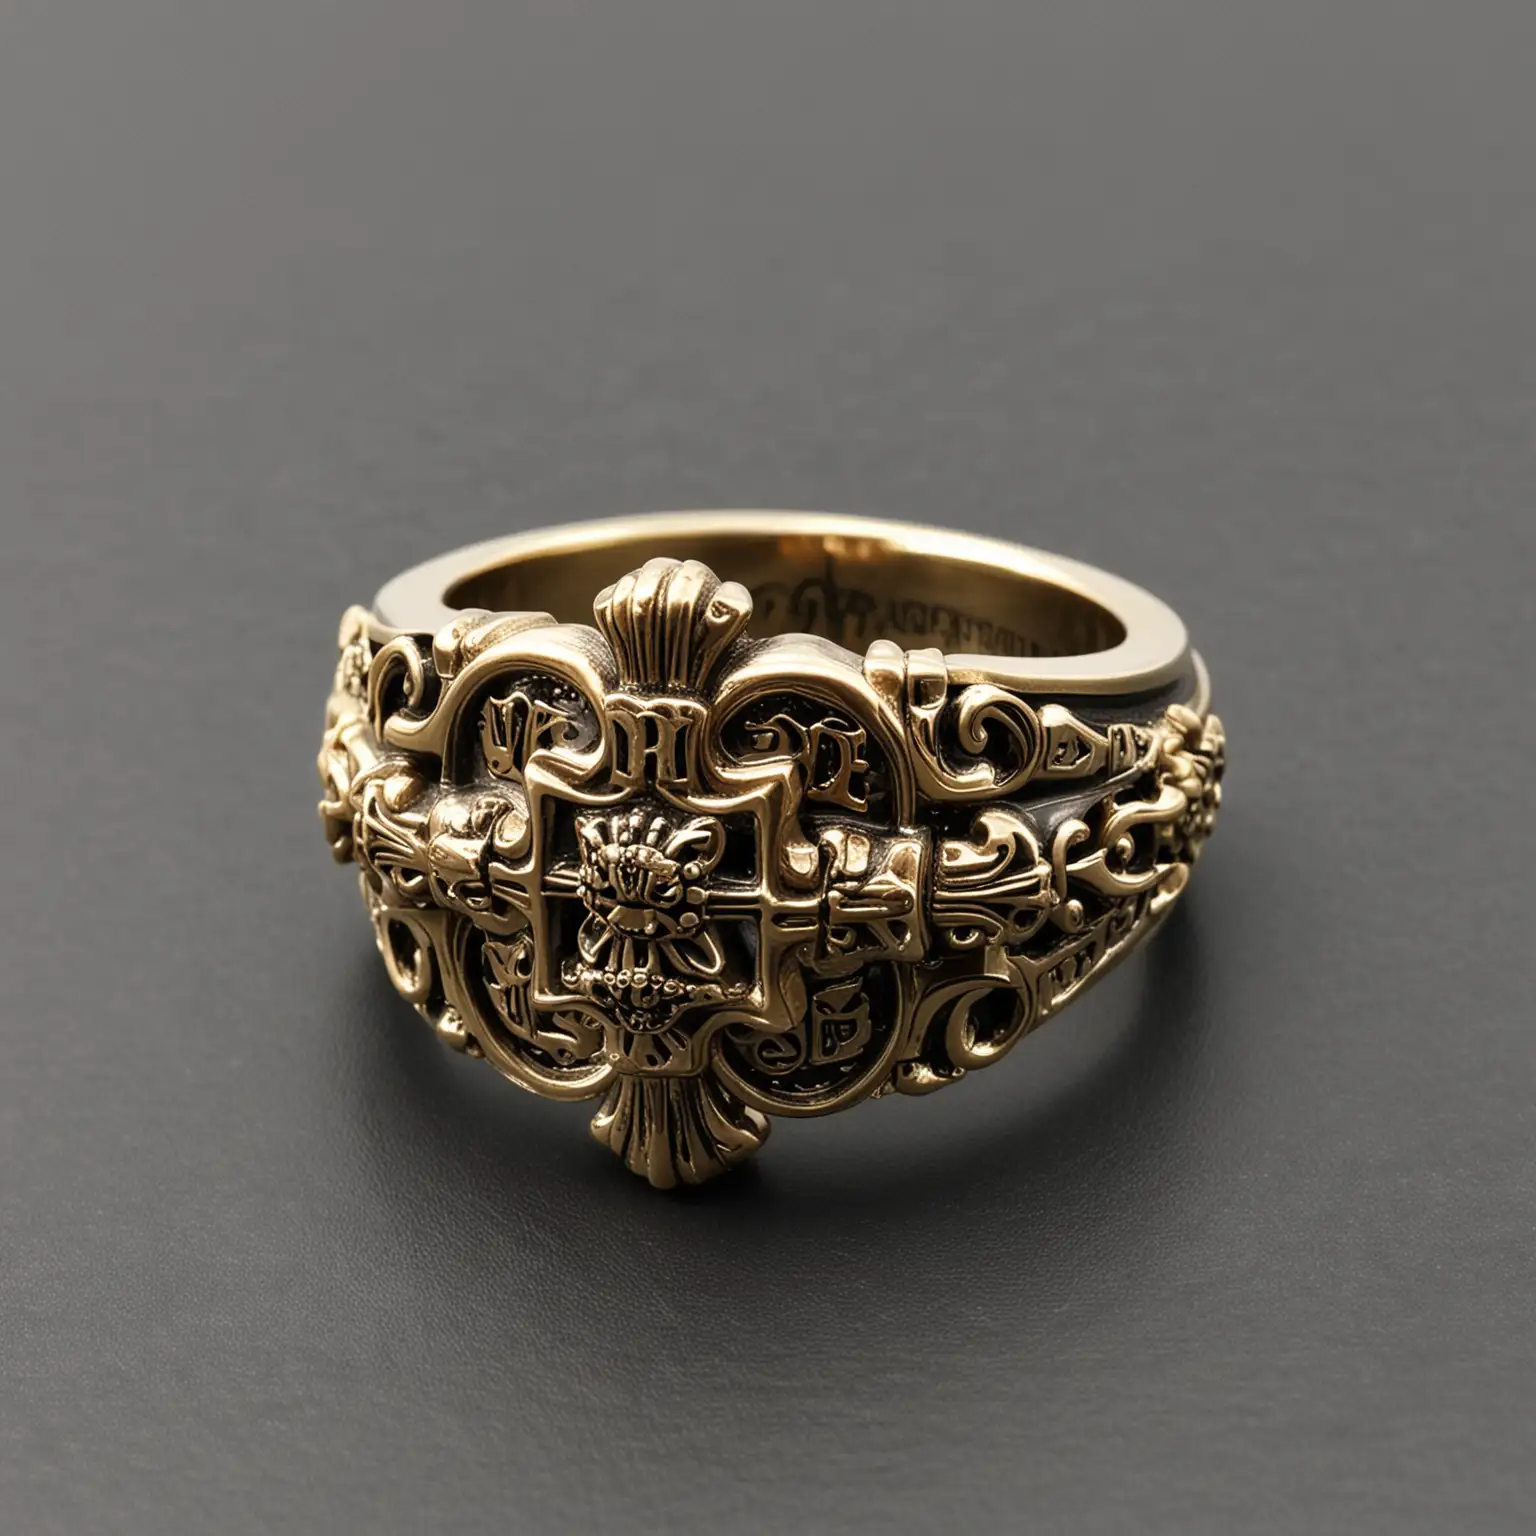 Chrome Hearts Inspired Antique Gold Ring Designer Jewelry Design